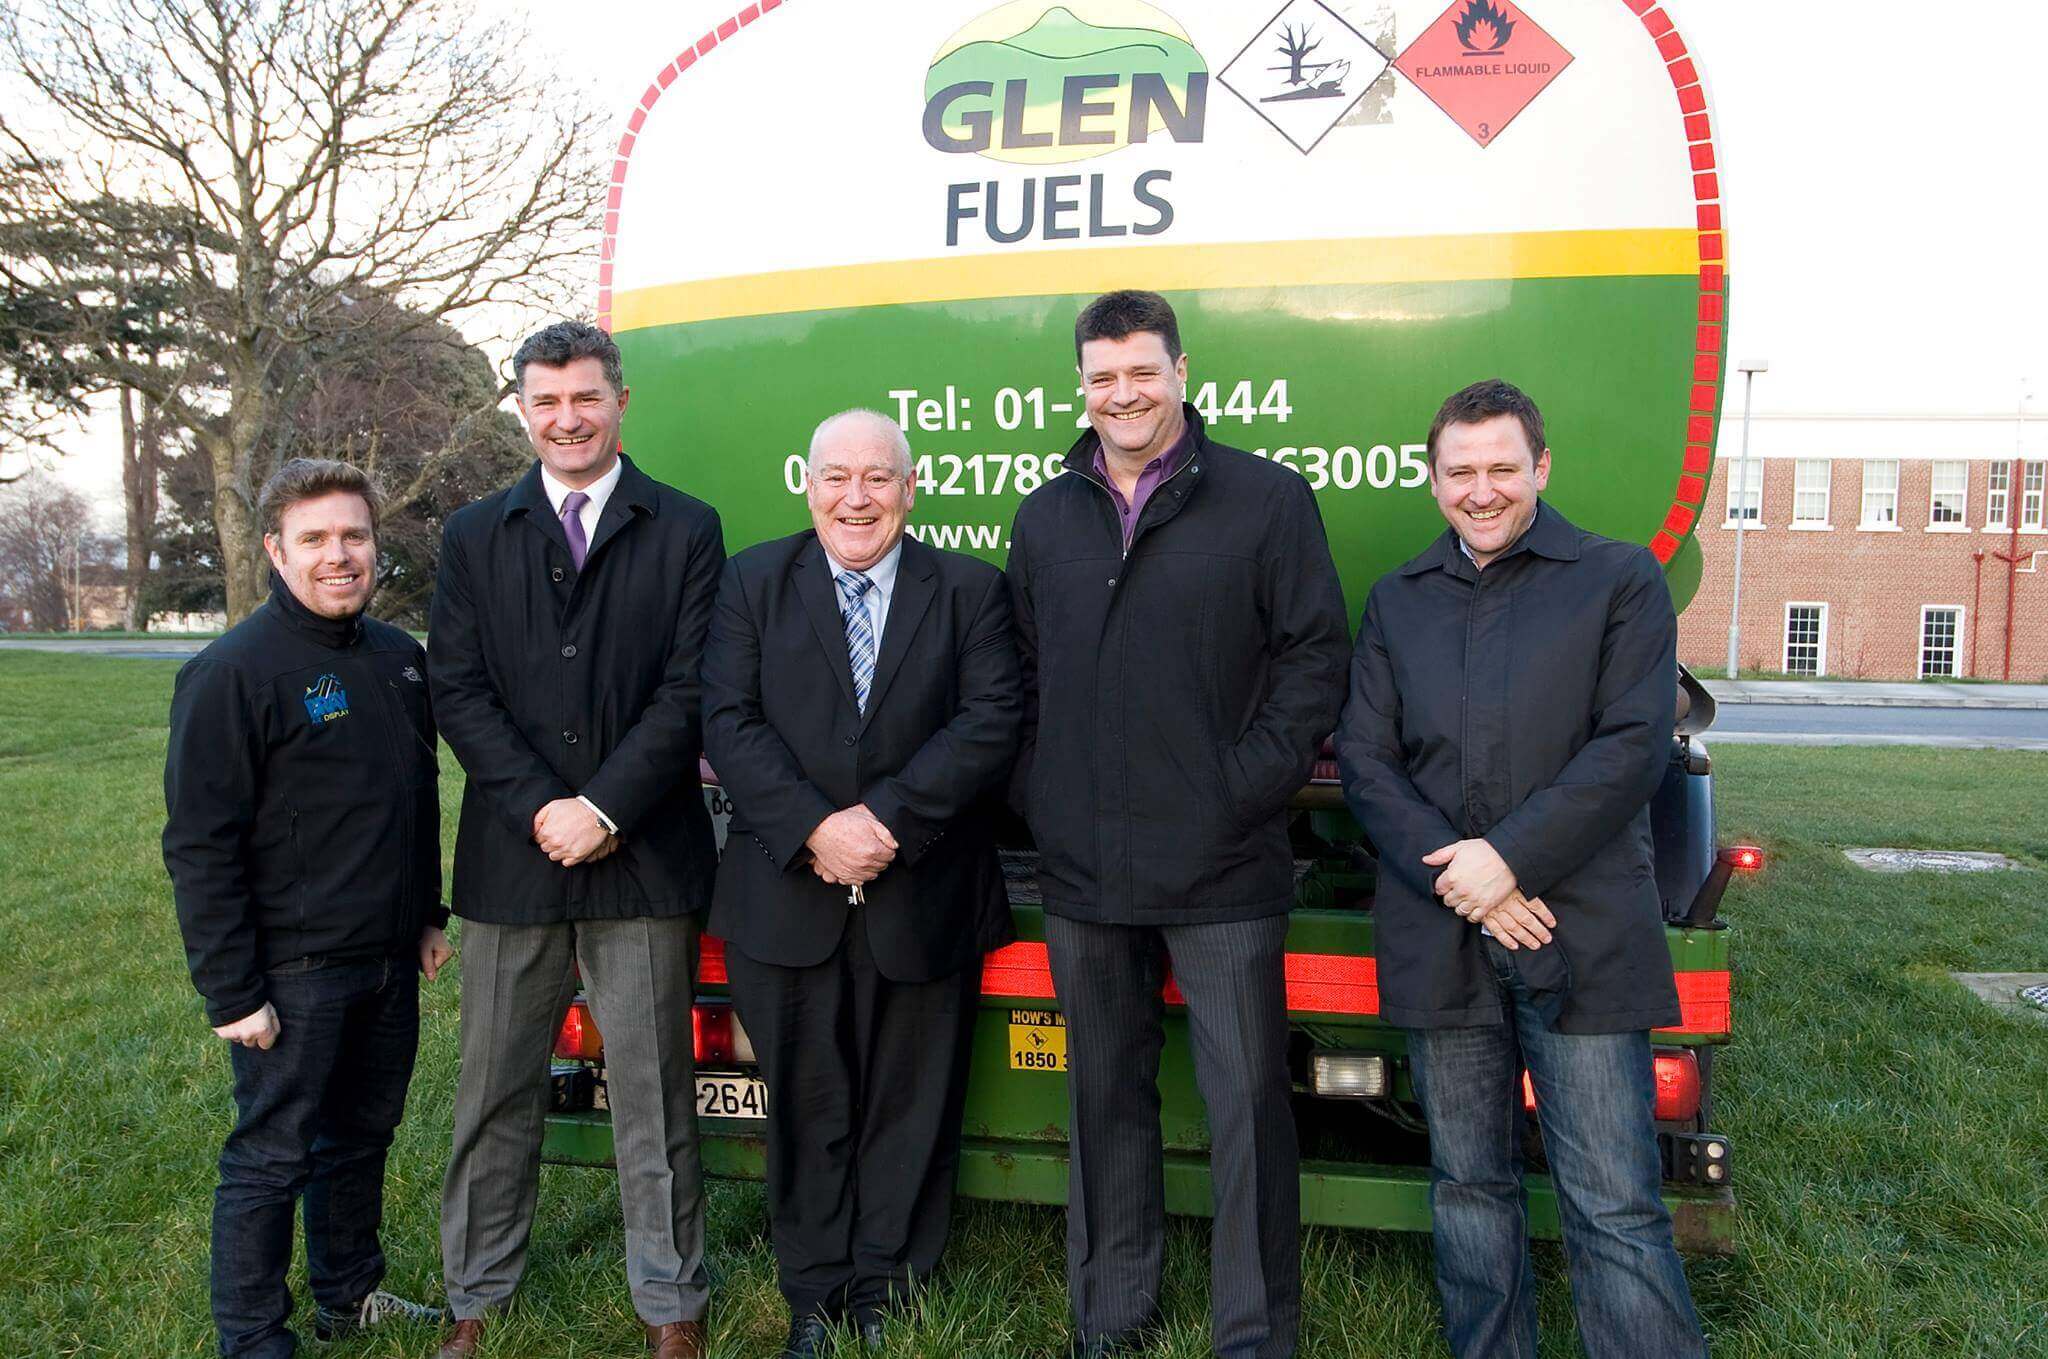 Although you can't see them in this picture, the school got new floodlights! The PPU was delighted to support the school along with Glen Fuels - well done Alan and Kevin Keyes. Pictured are Mick Glynn (PPU), Alan Keyes, Gerry Duffy, Kevin Keyes and Graham O'Neill (PPU)